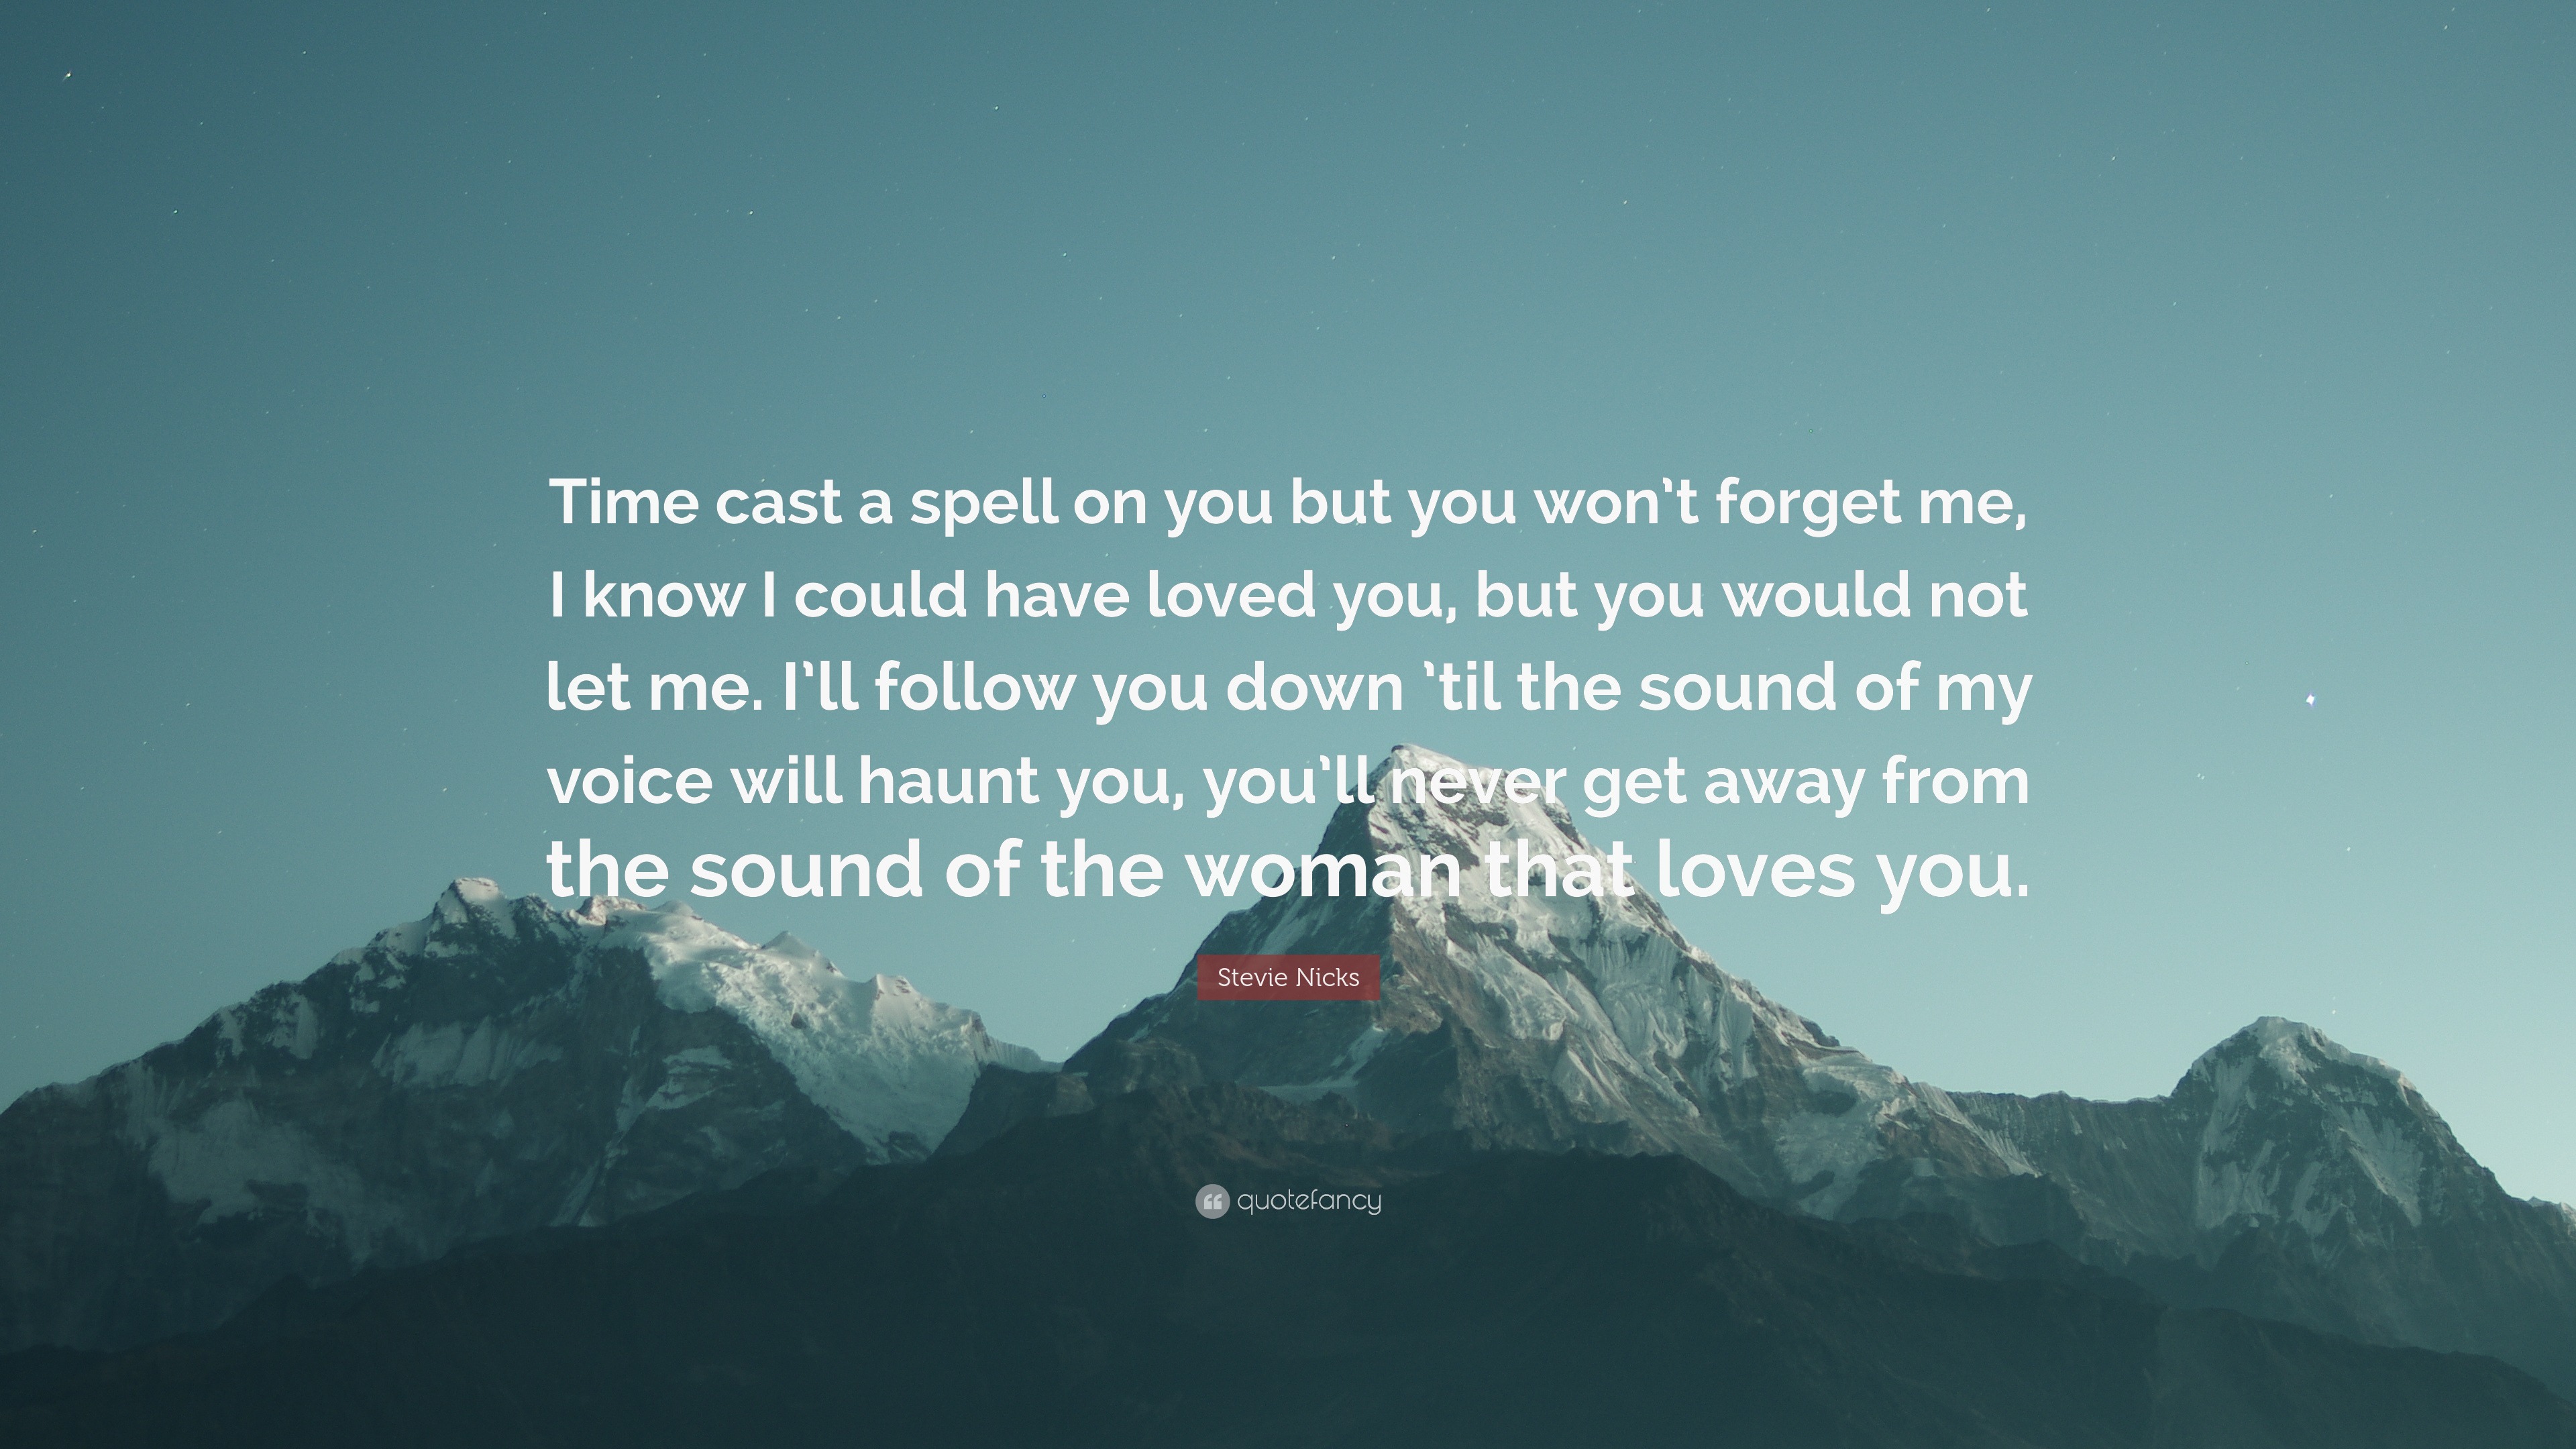 Stevie Nicks Quote: “Time cast a spell on you but you won't forget